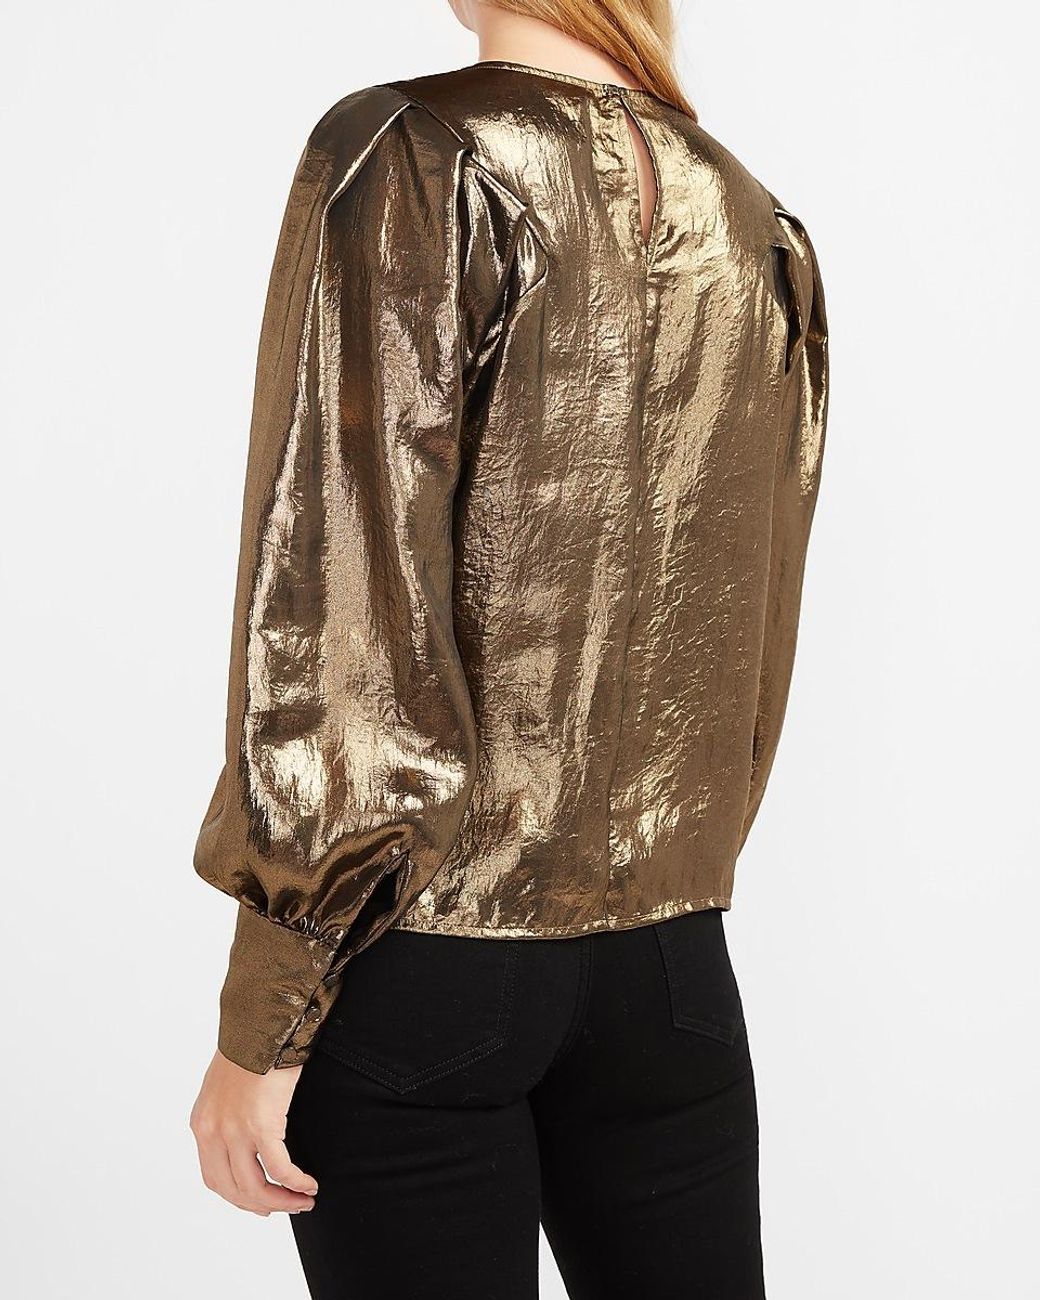 Express Denim Gold Foil Pleated Balloon Sleeve Top Gold in Metallic - Lyst